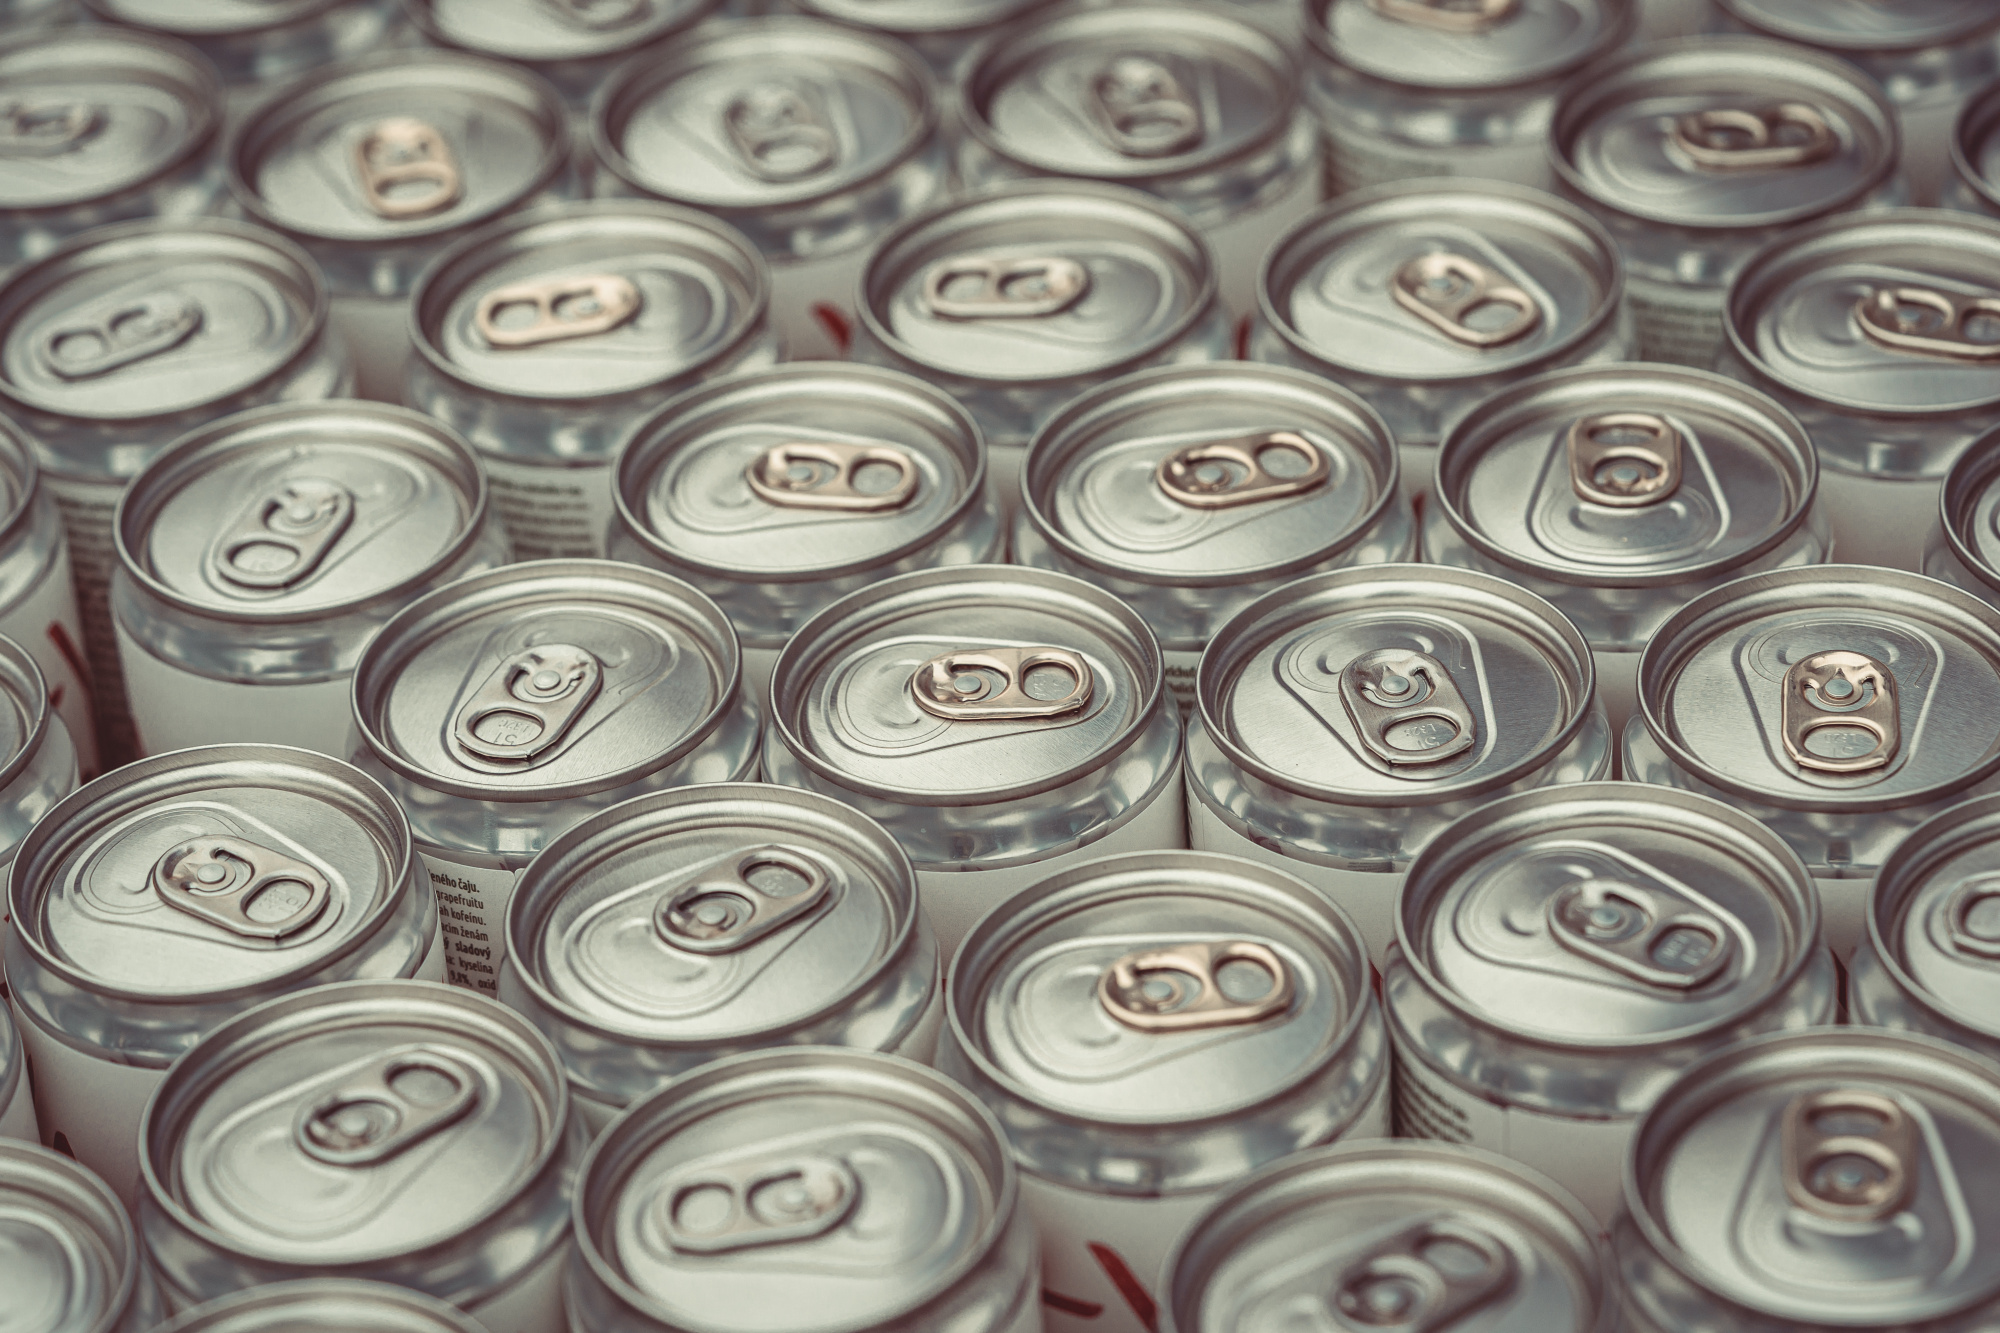 Cans in manufacturing